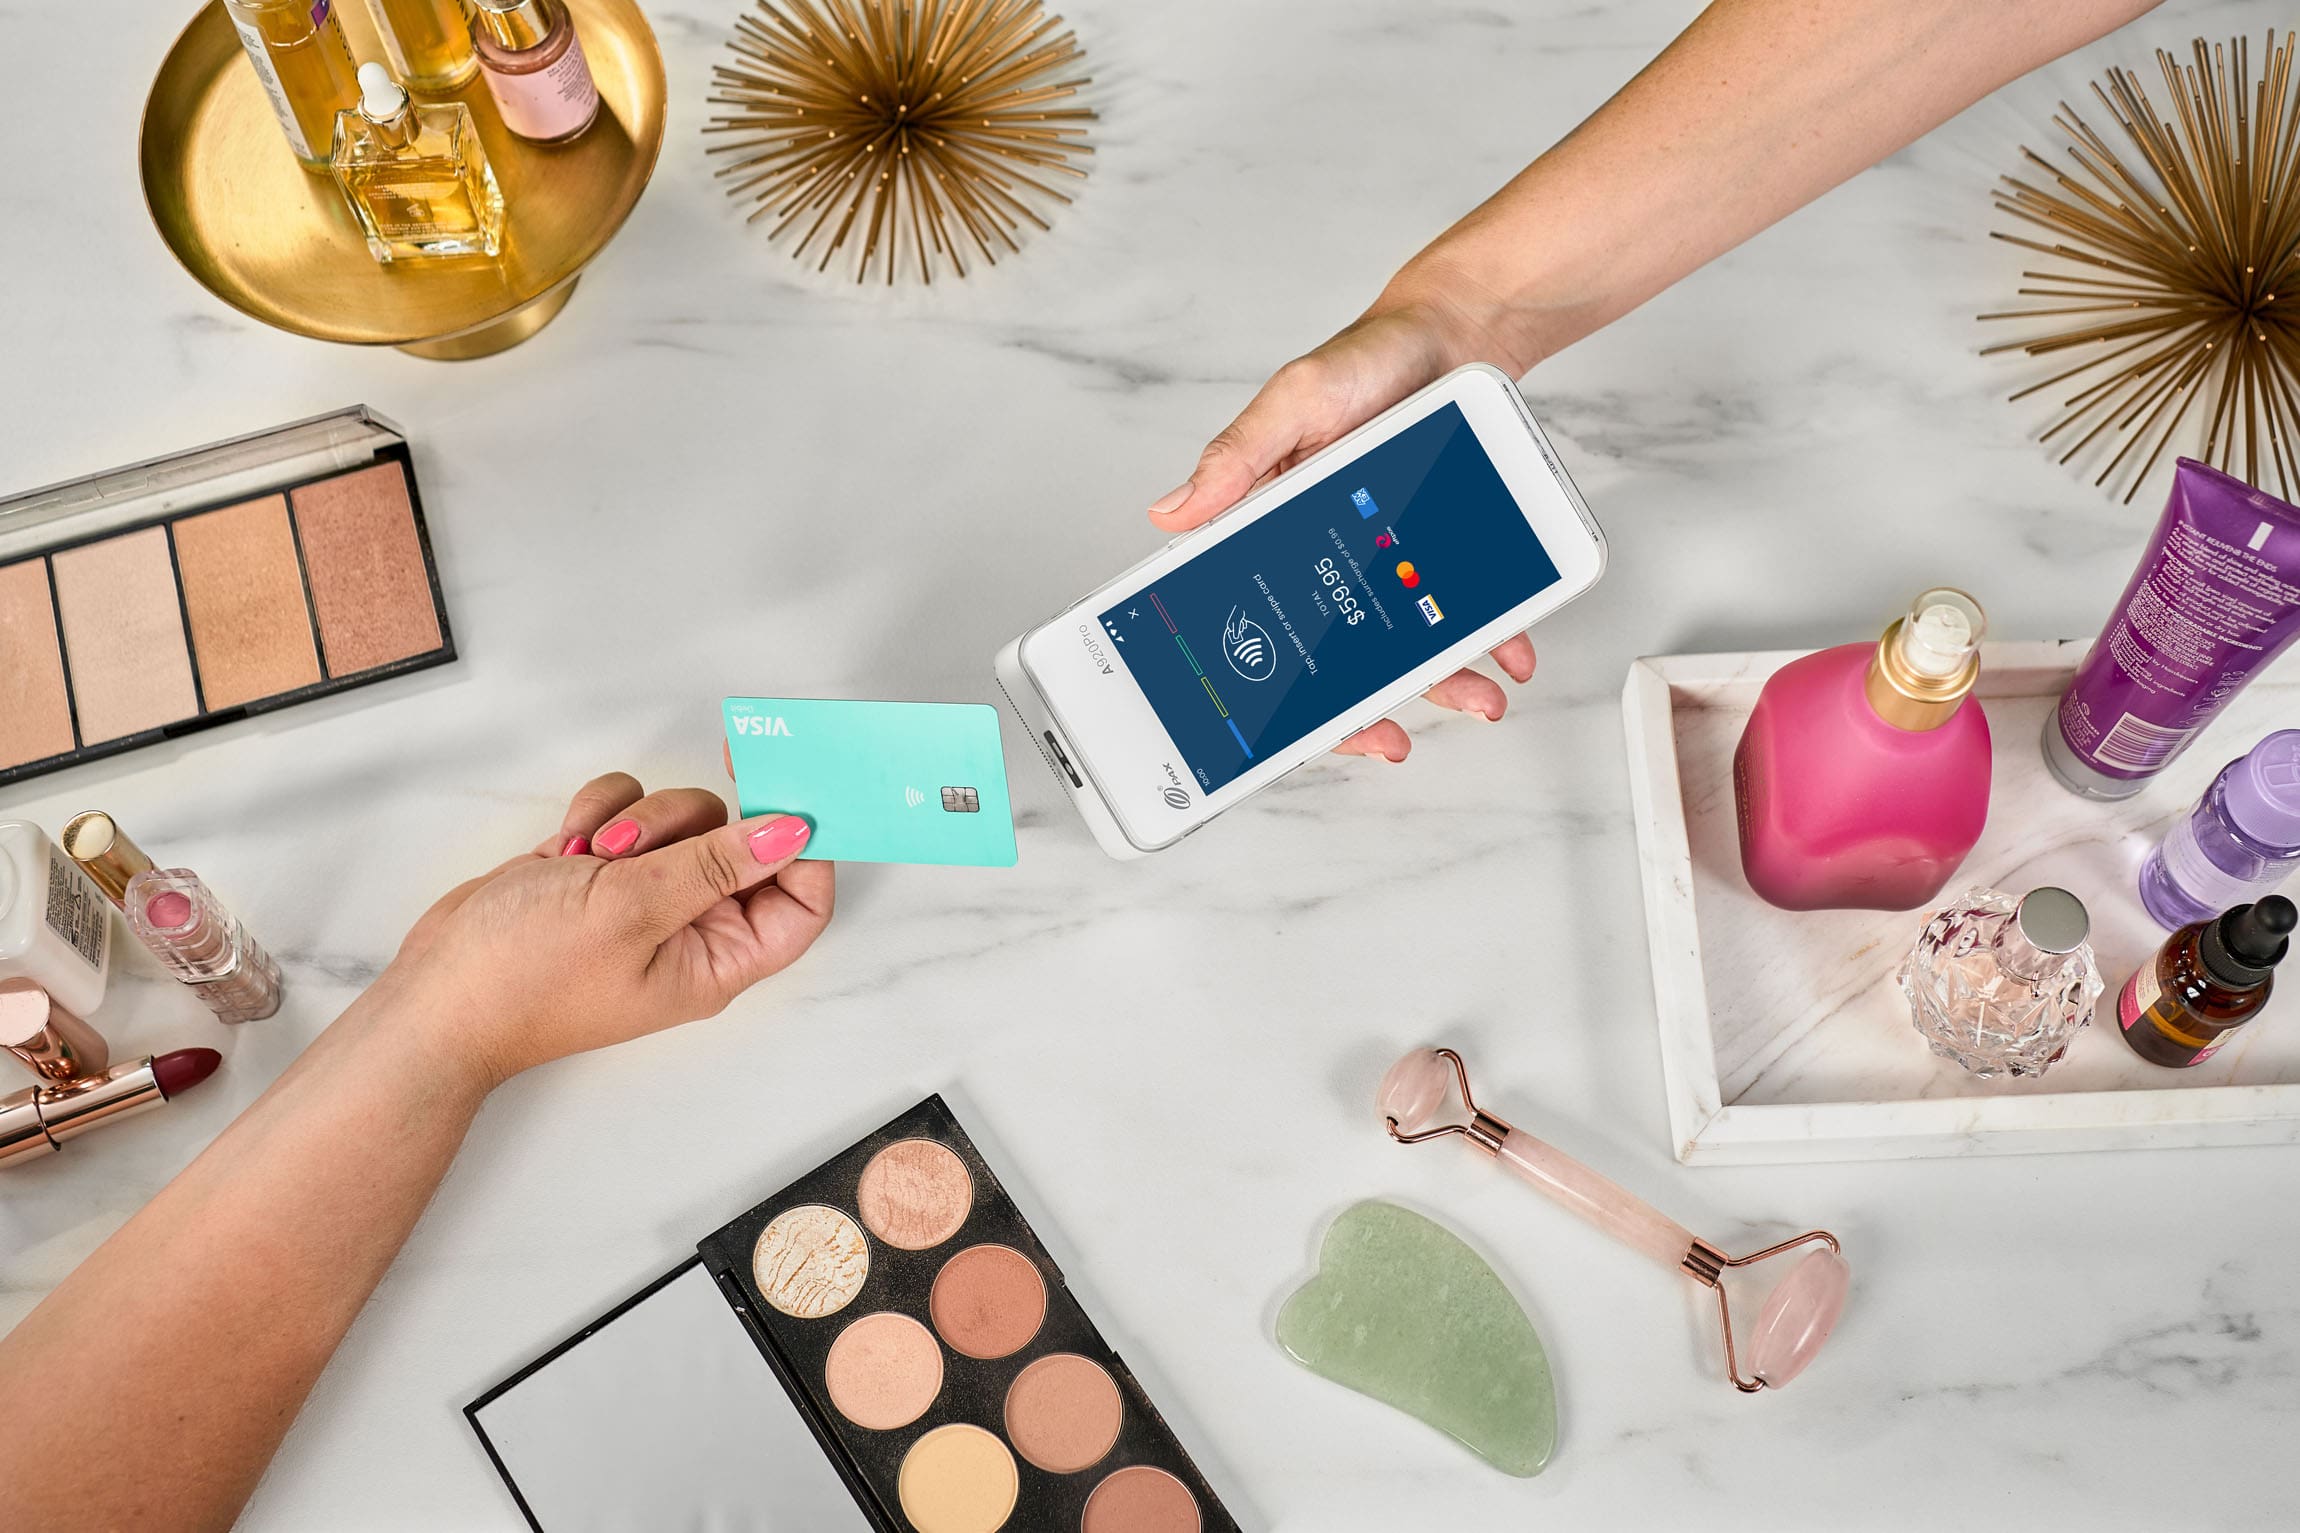 Visa card tapping Smartpay Android terminal surrounded by cosmetic accessories